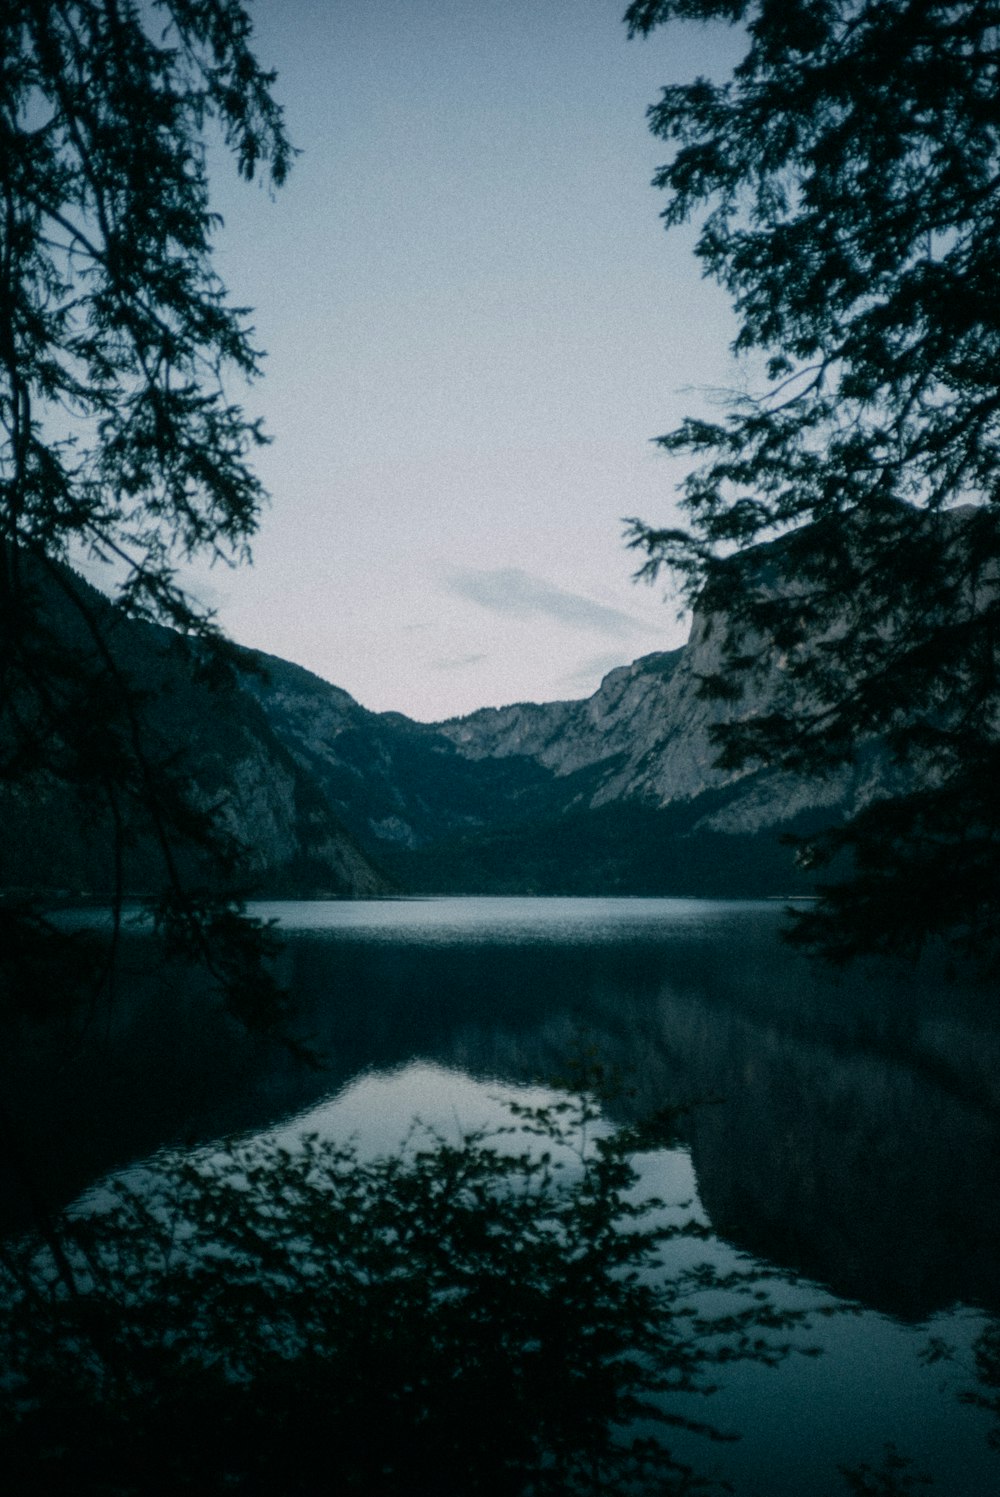 lake surrounded by trees and mountains